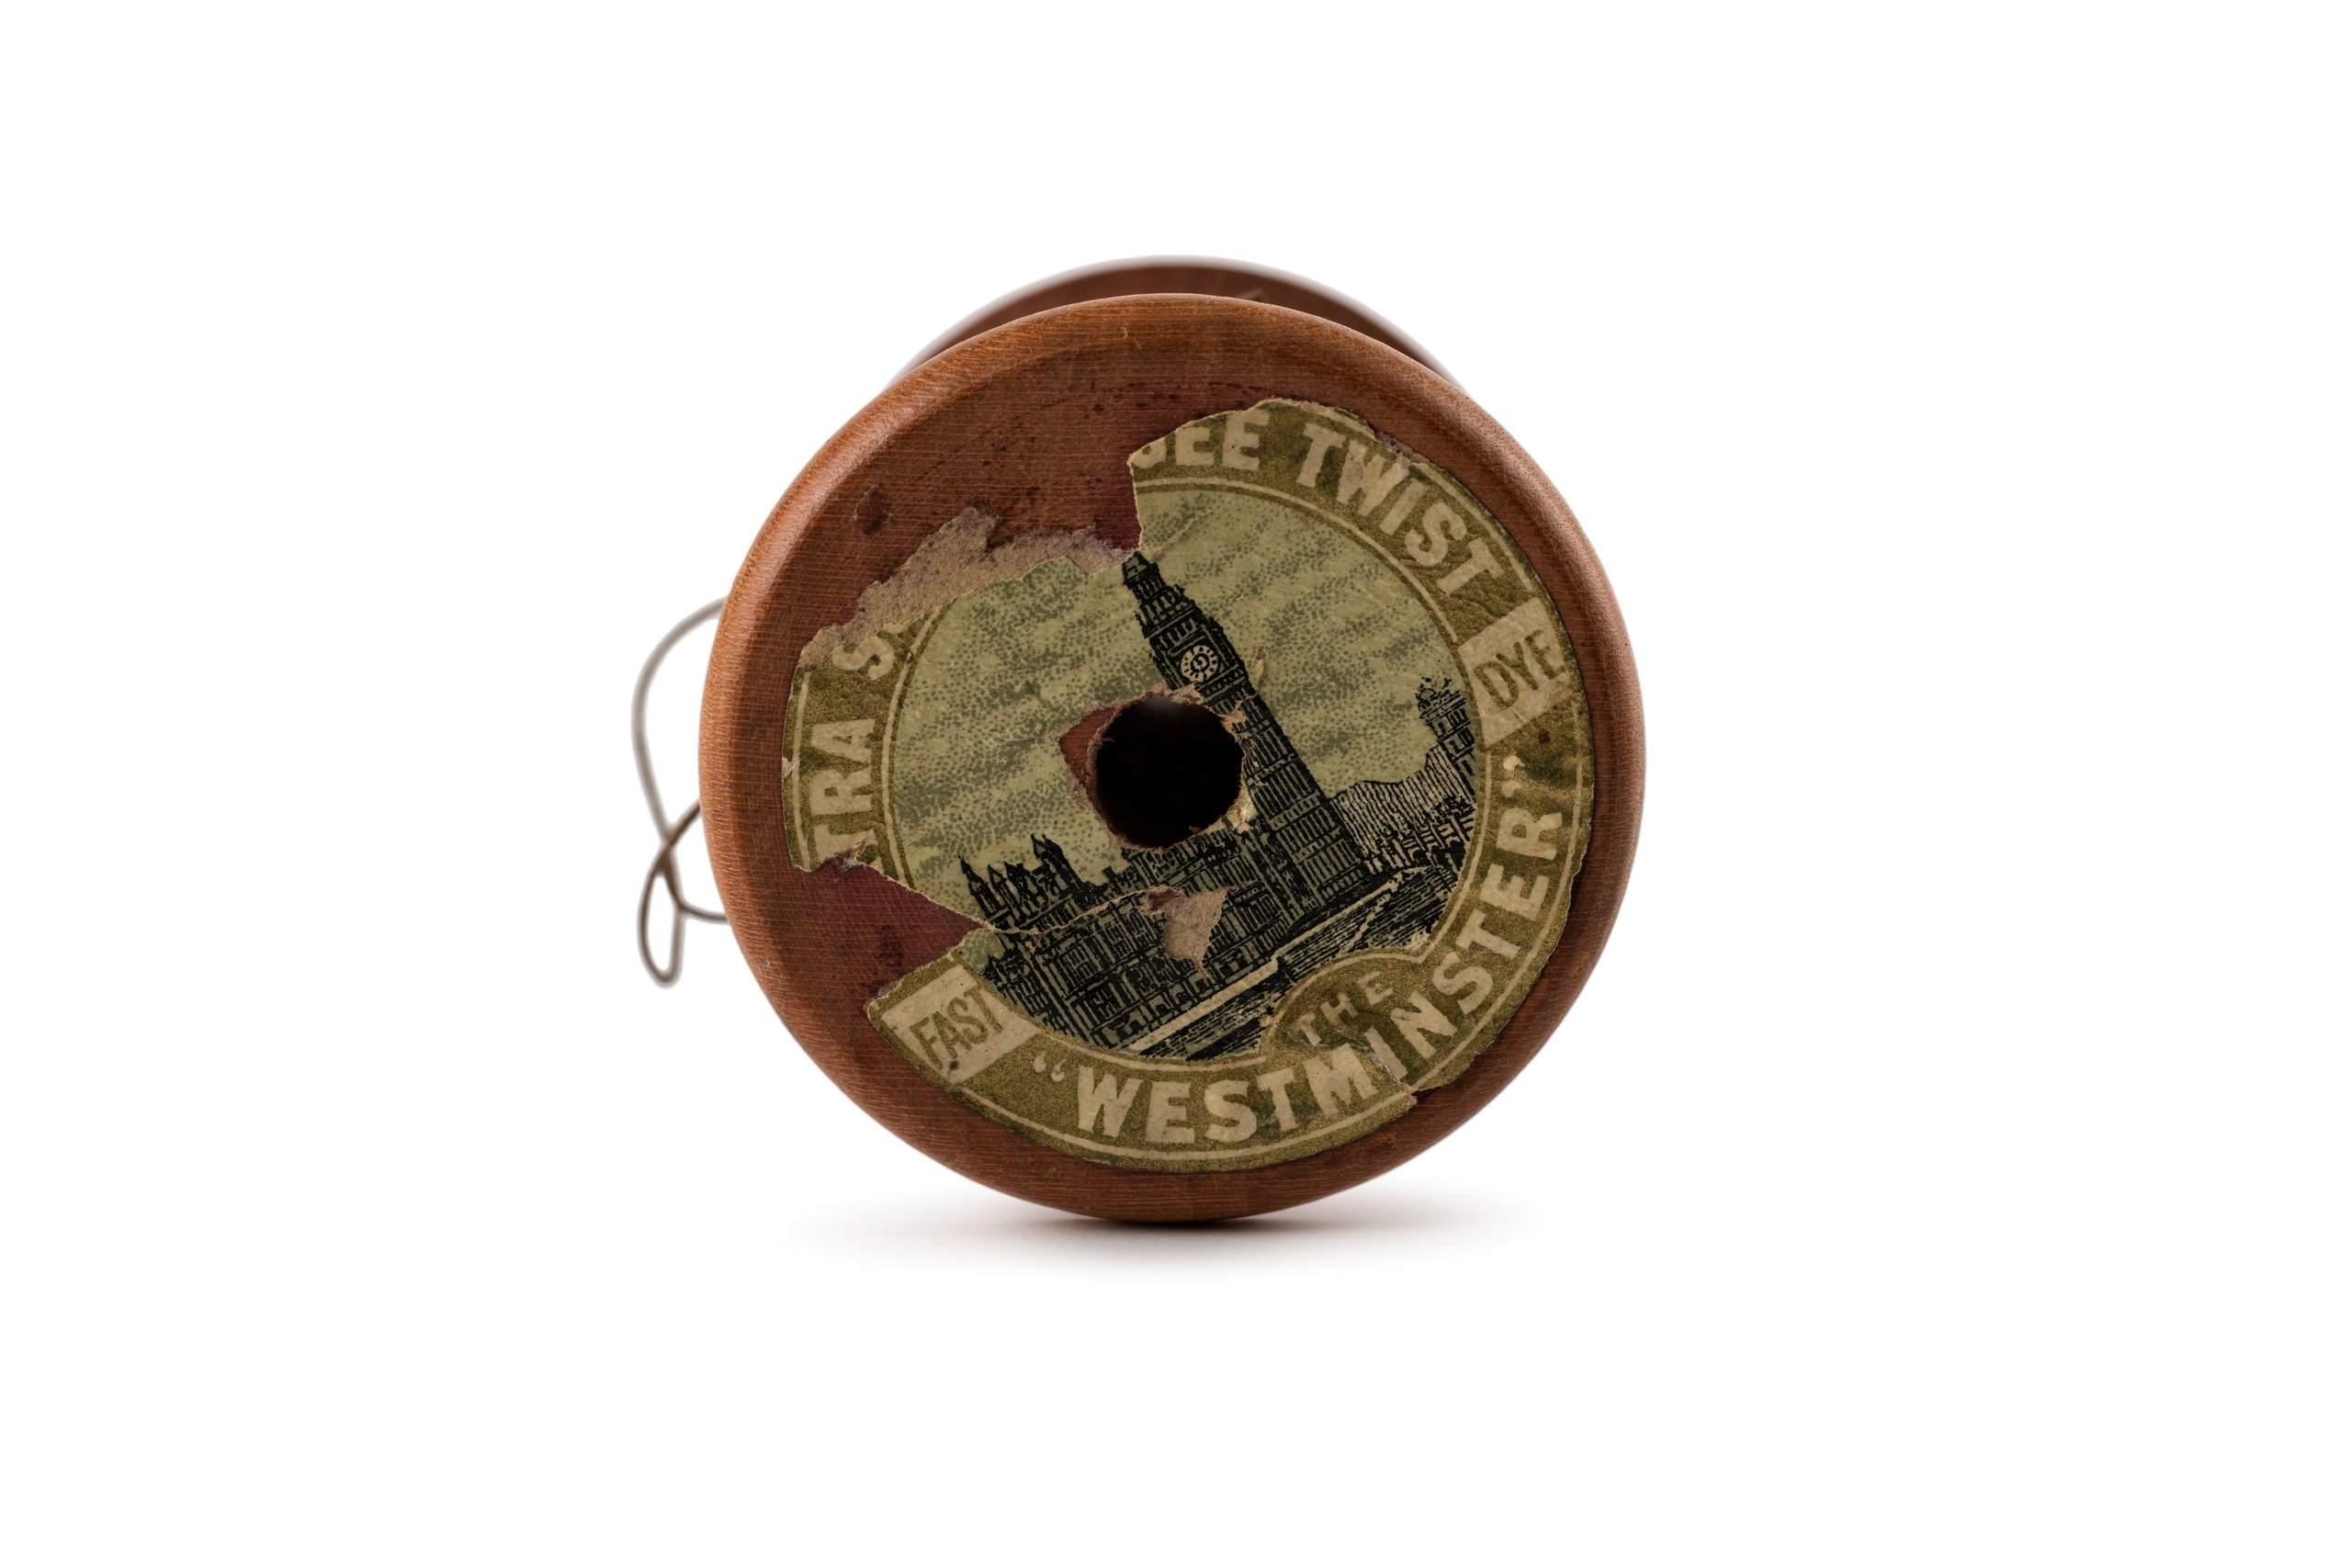 Thread reel used by Ron Gillman